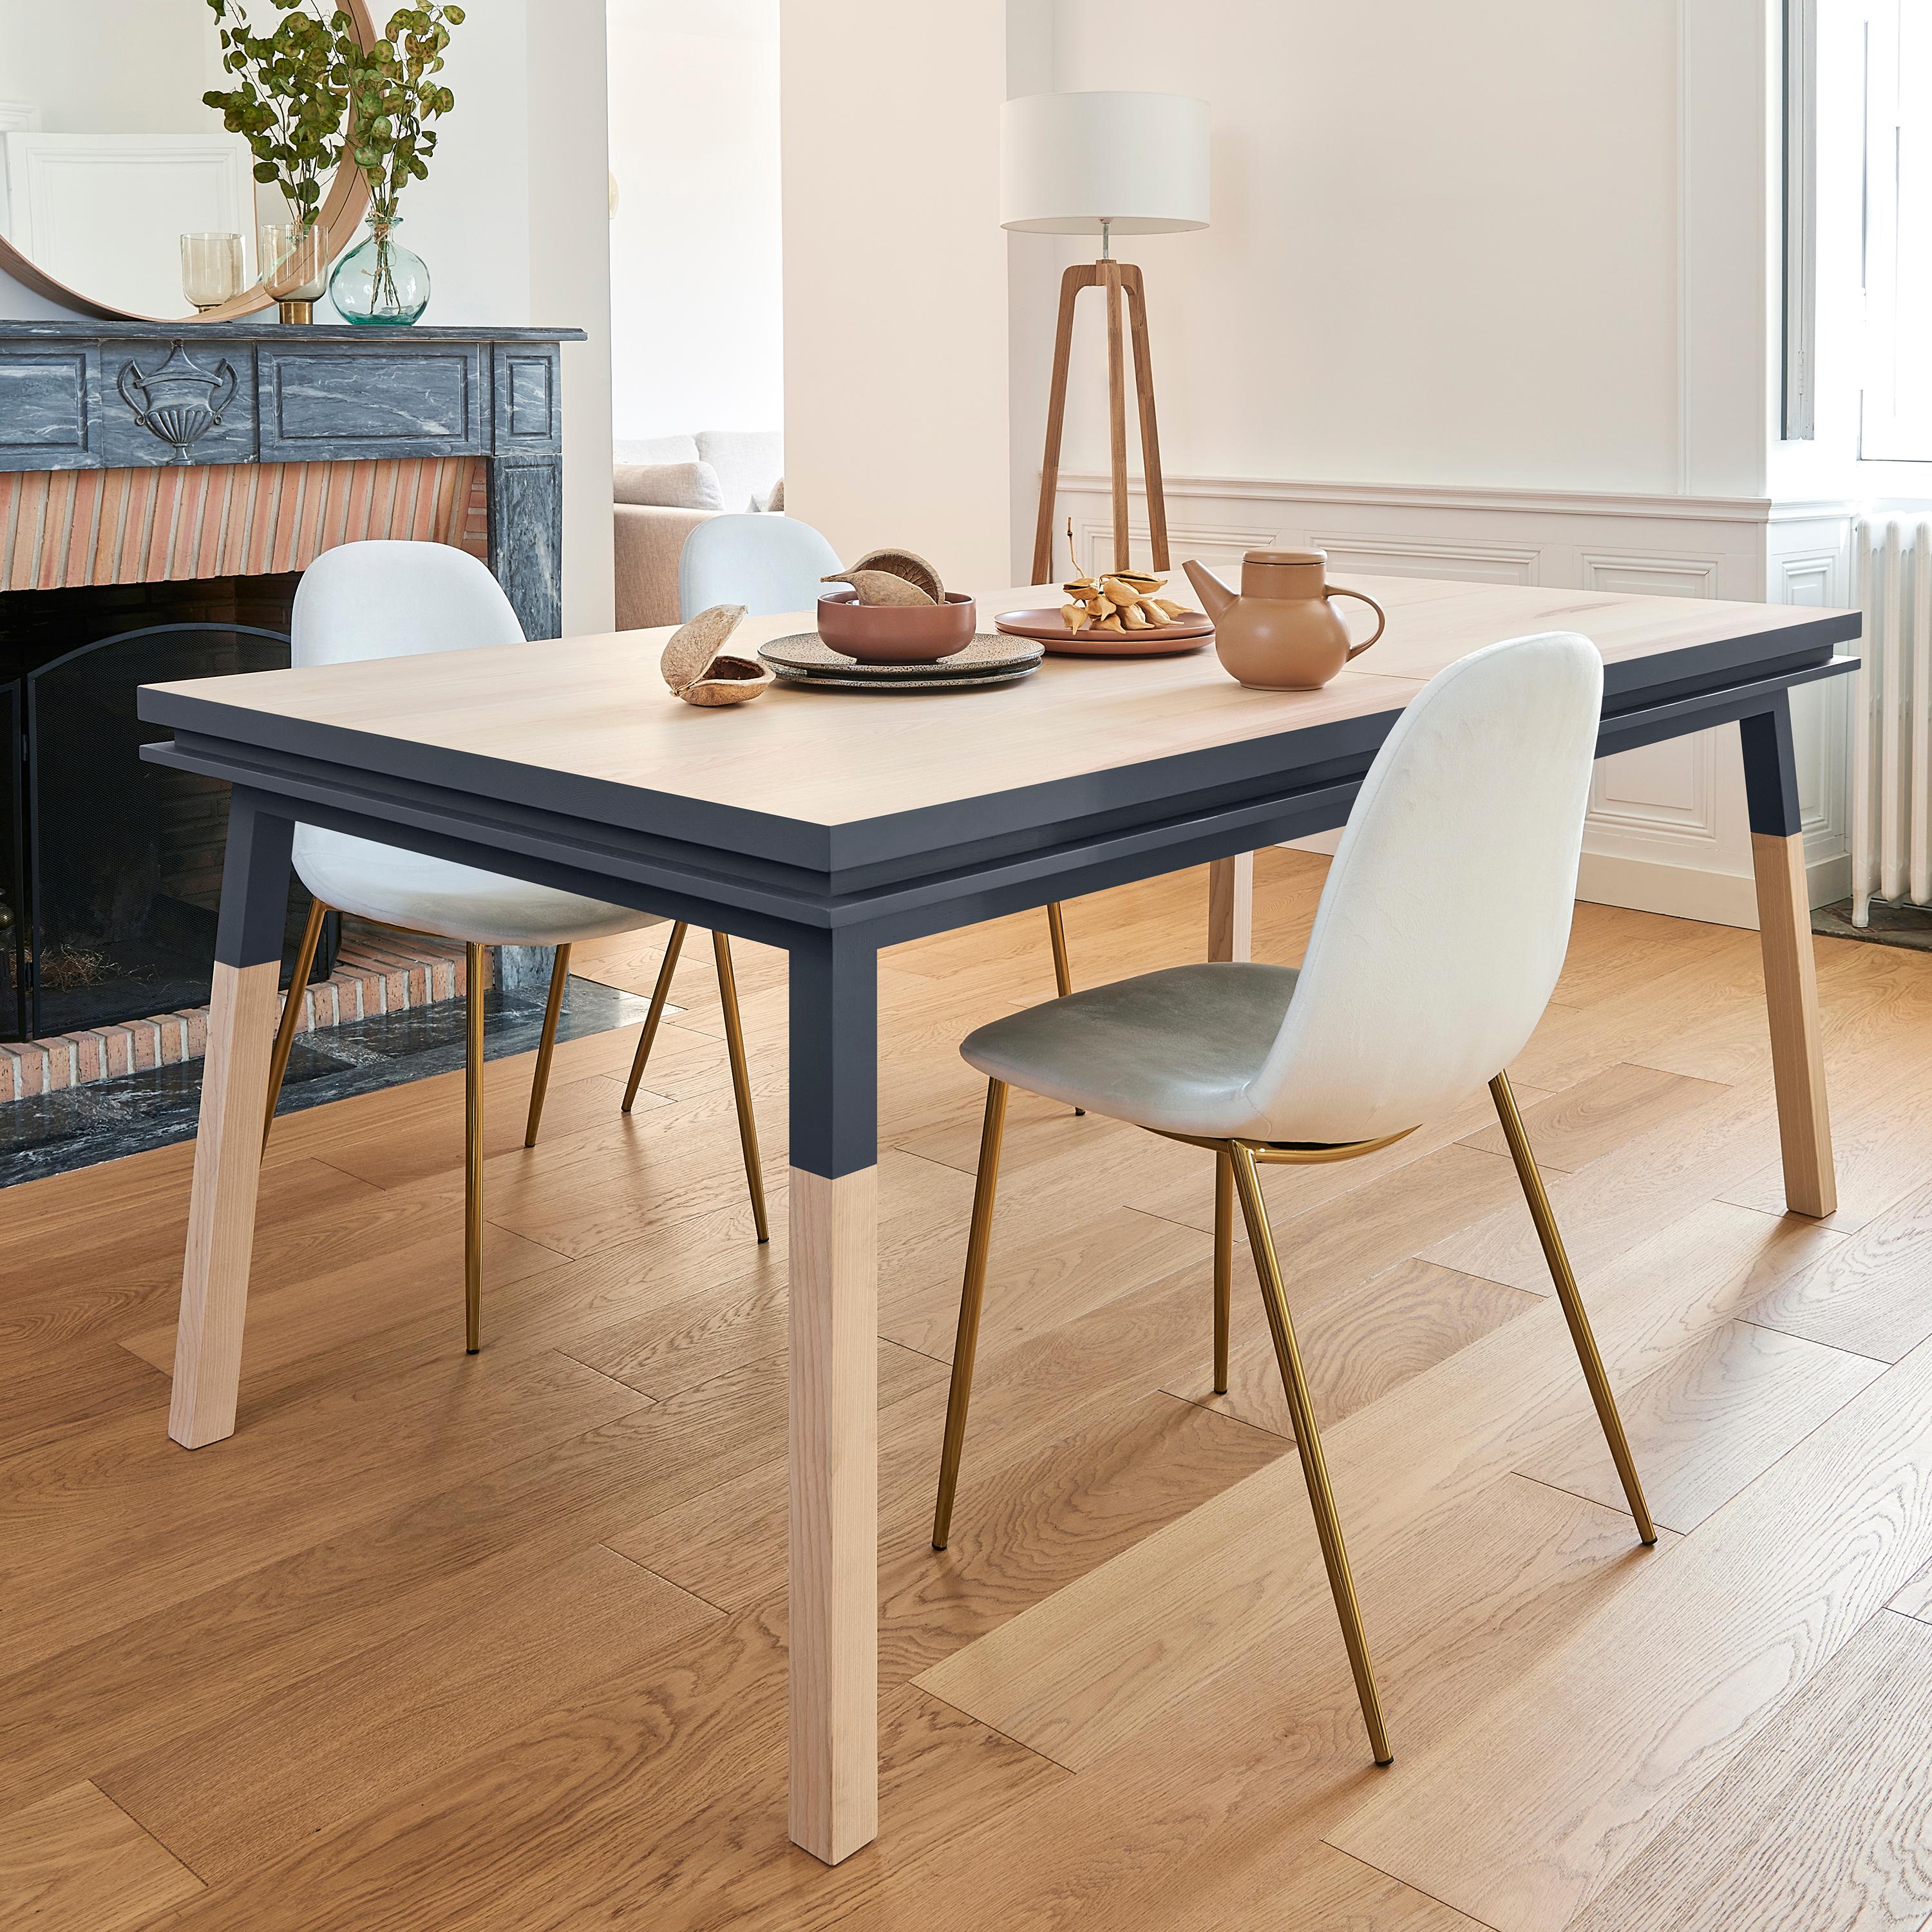 This rectangular dining table is proposed with 2 integrated and folded extensions. 

It is made of 100% solid ash wood from sustainably managed and PEFC certified French forests.

The 3 lengths are 190 cm / 74.8